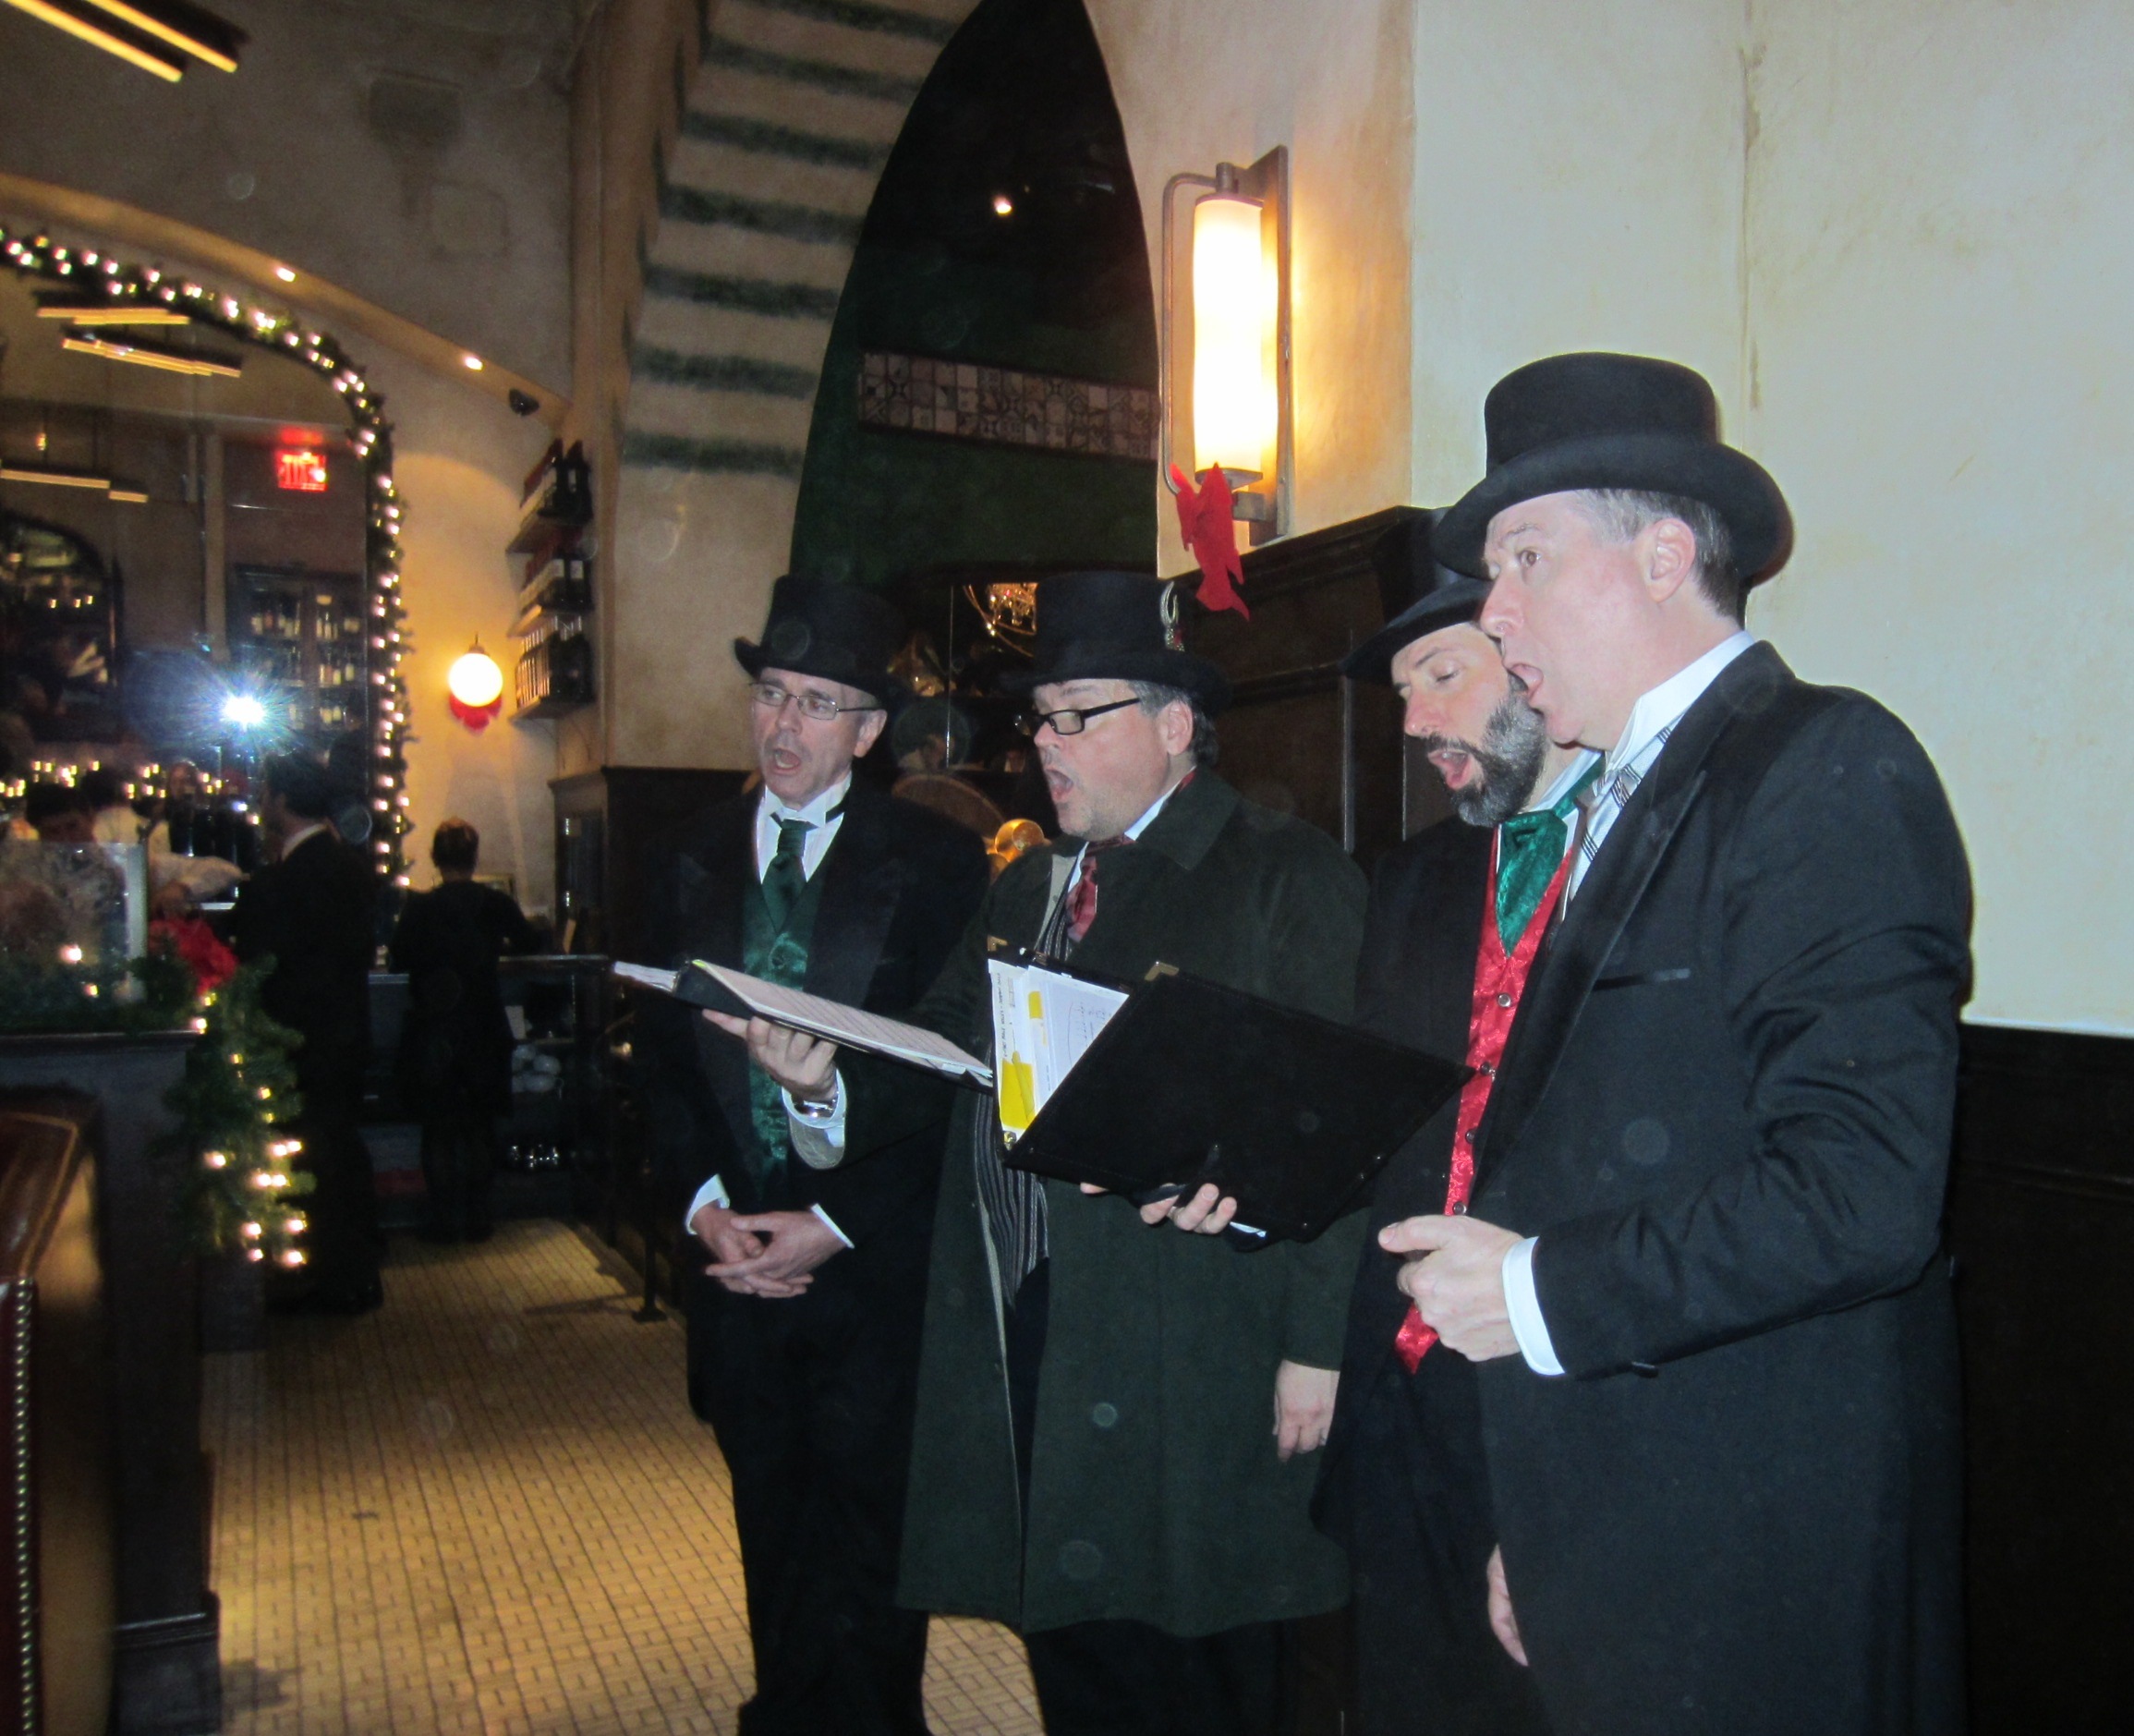 The-Gentlemen-Carolers-appearing-at-The-Florian-Restaurant-NY